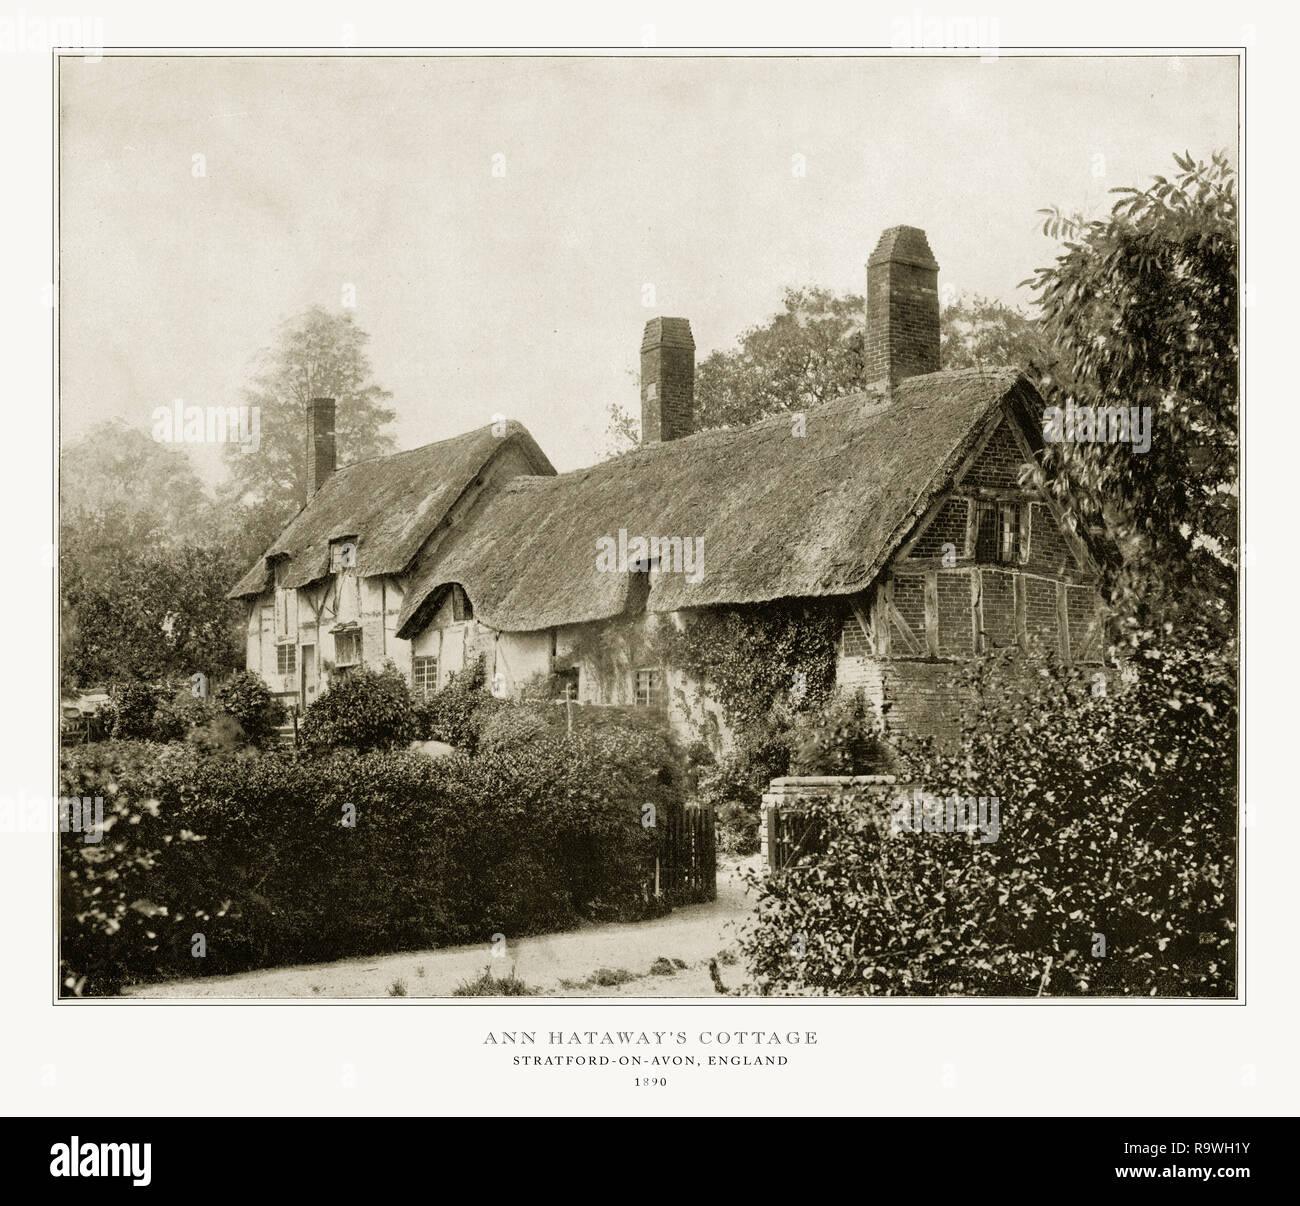 Anne Hathaway's Cottage, Stratford-On-Avon, England, Angleterre, 1893 Photographie Ancienne Banque D'Images